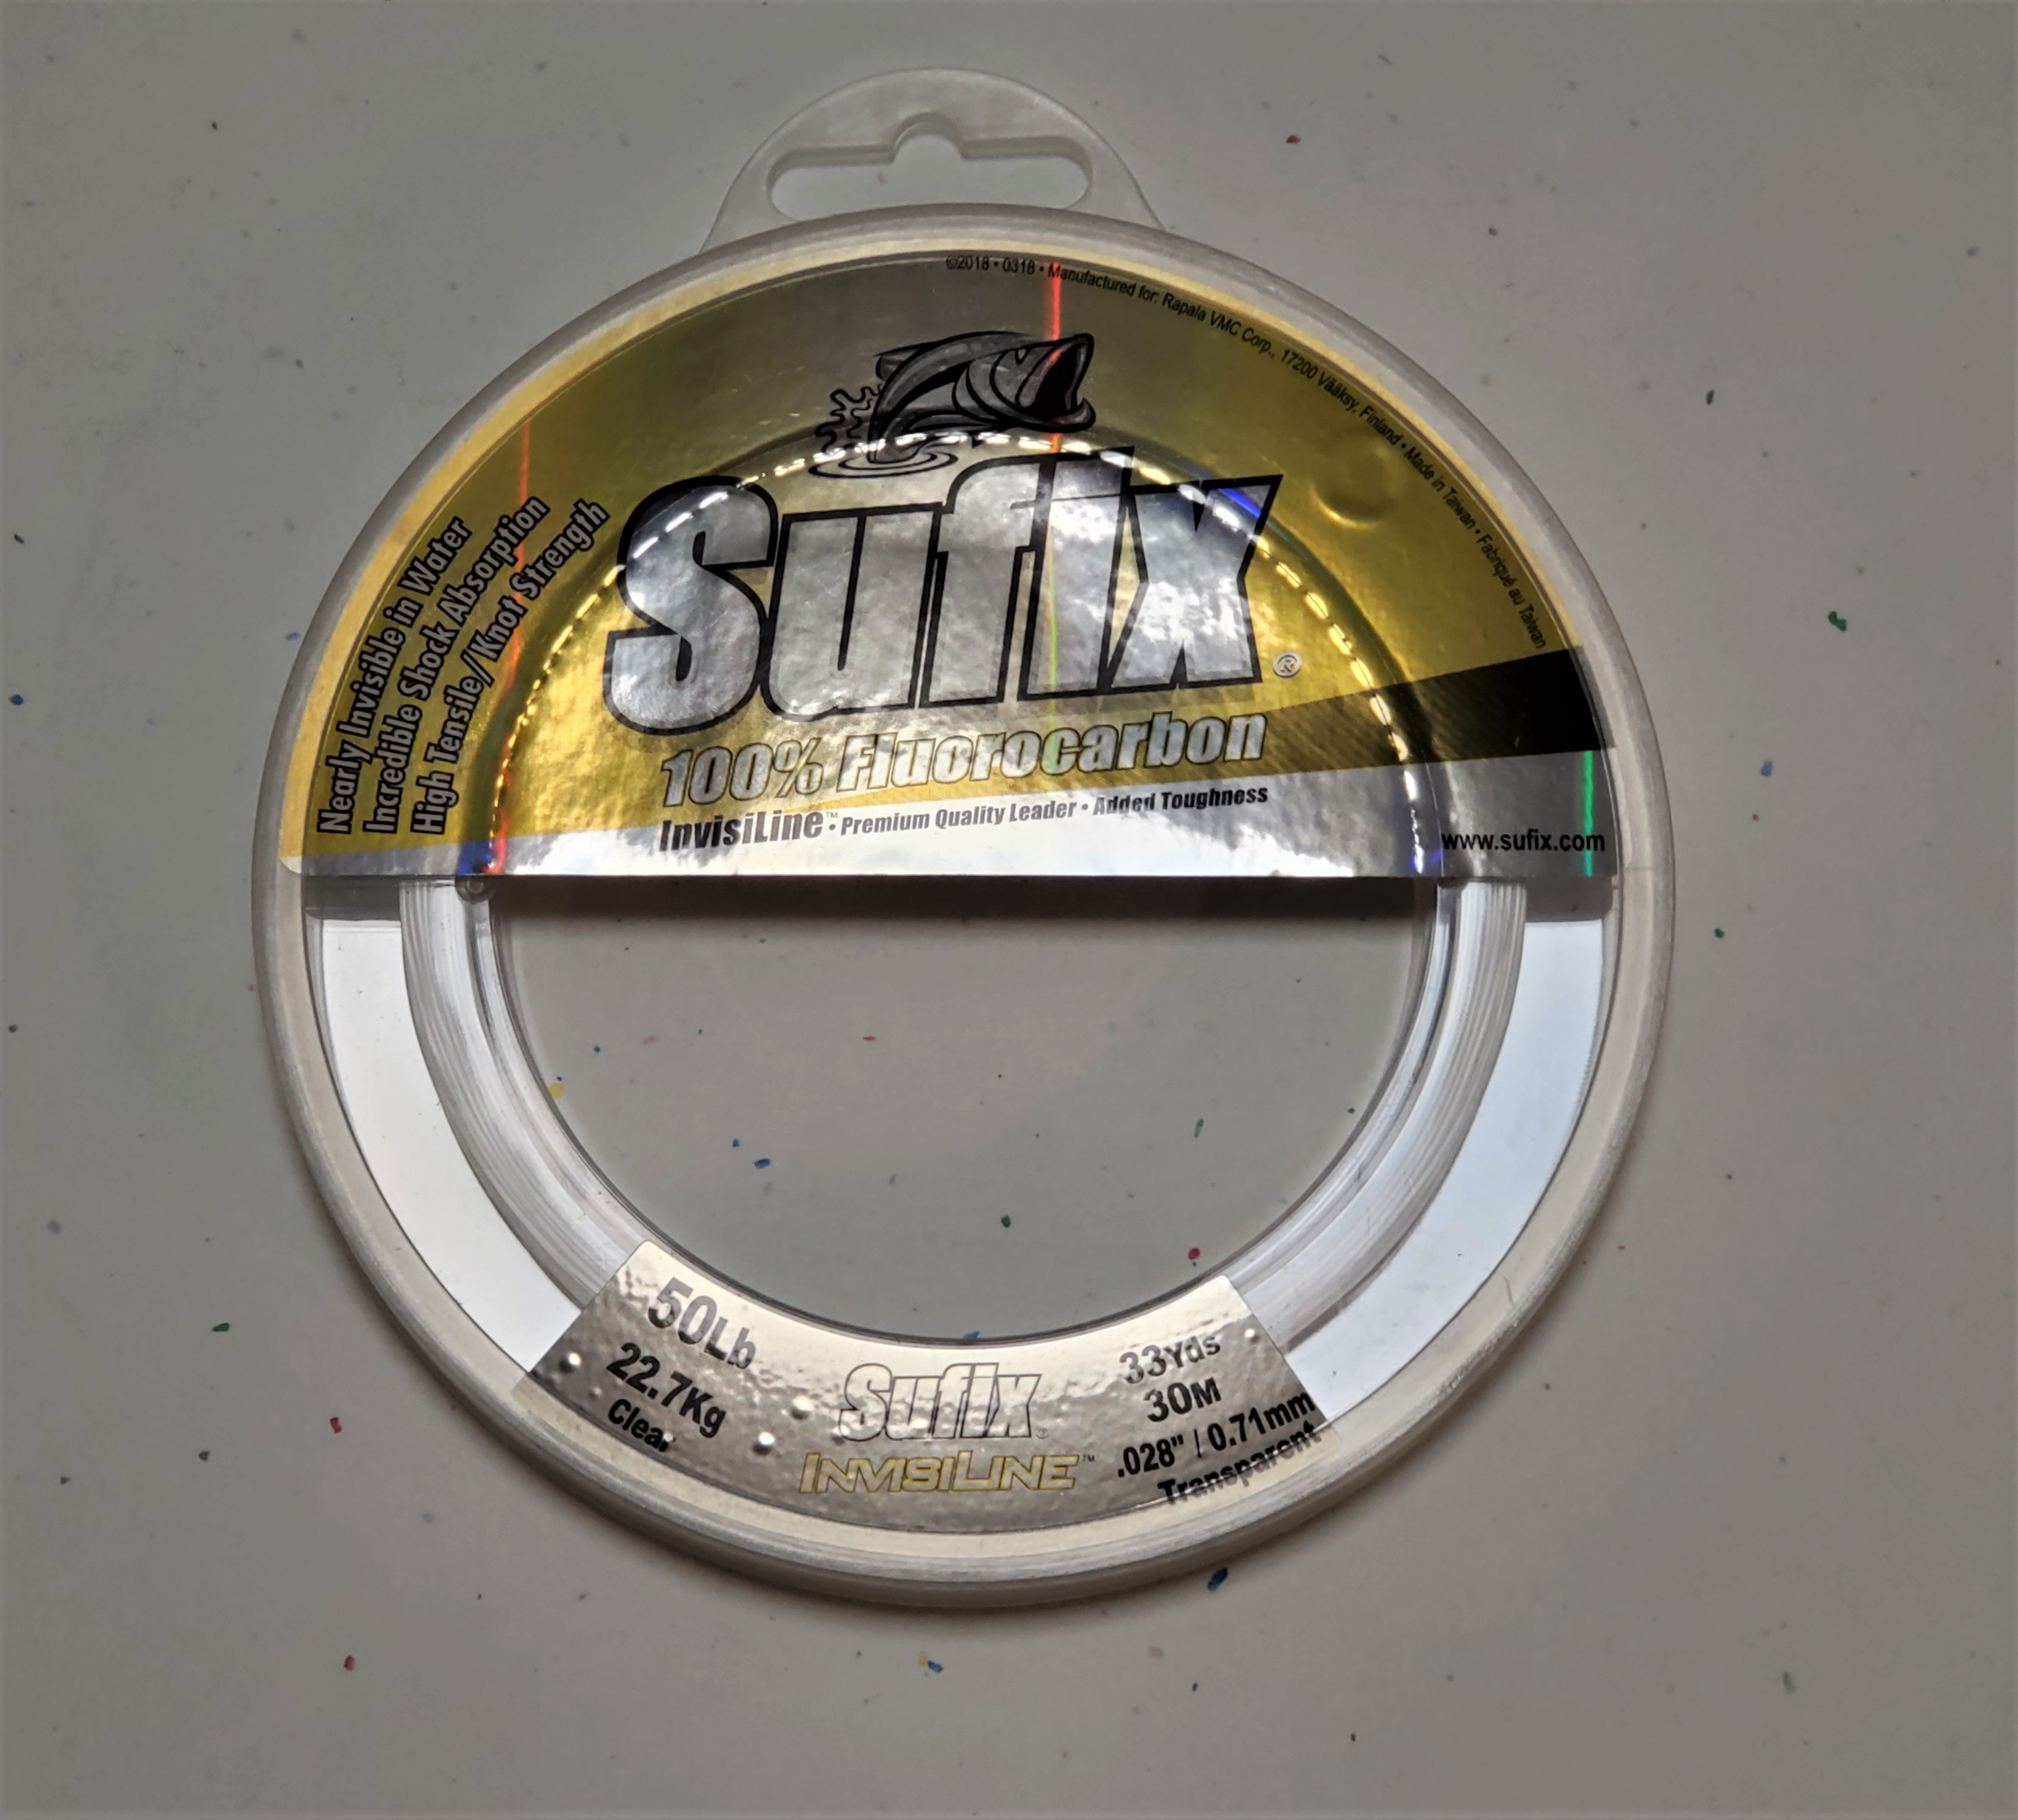 Sufix Invisiline Fluorocarbon Leader Fishing Line, Clear